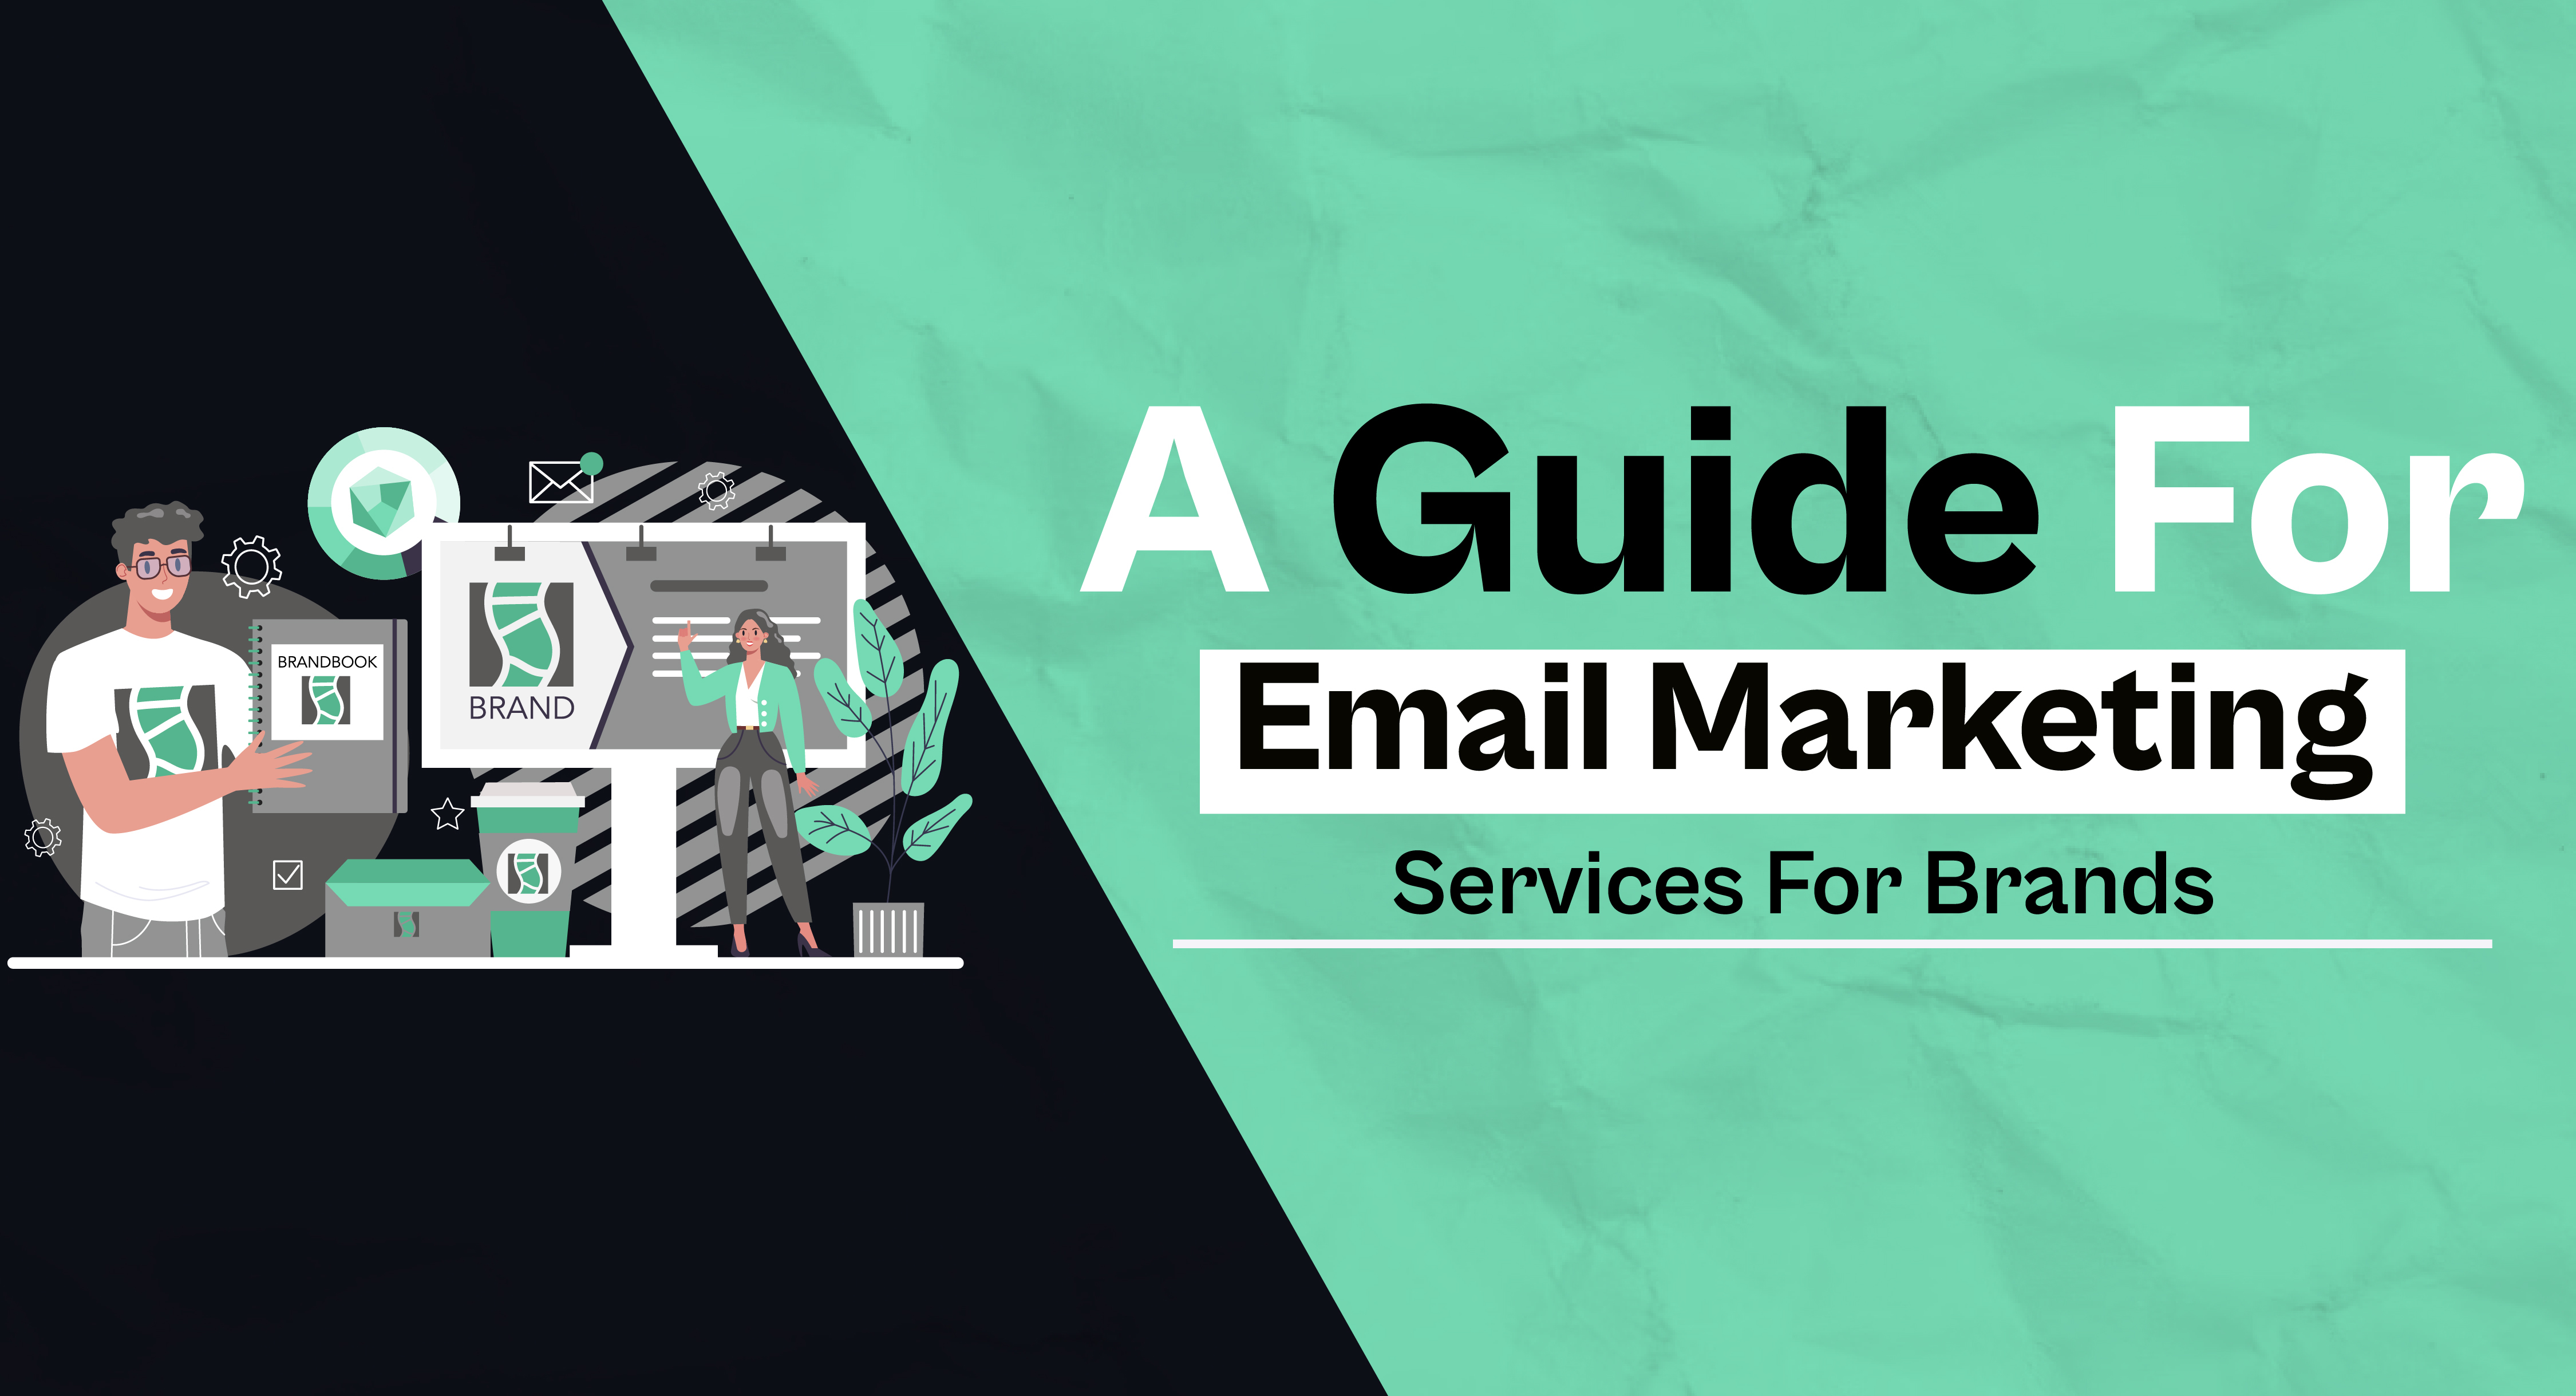 A guide for email marketing services for brands